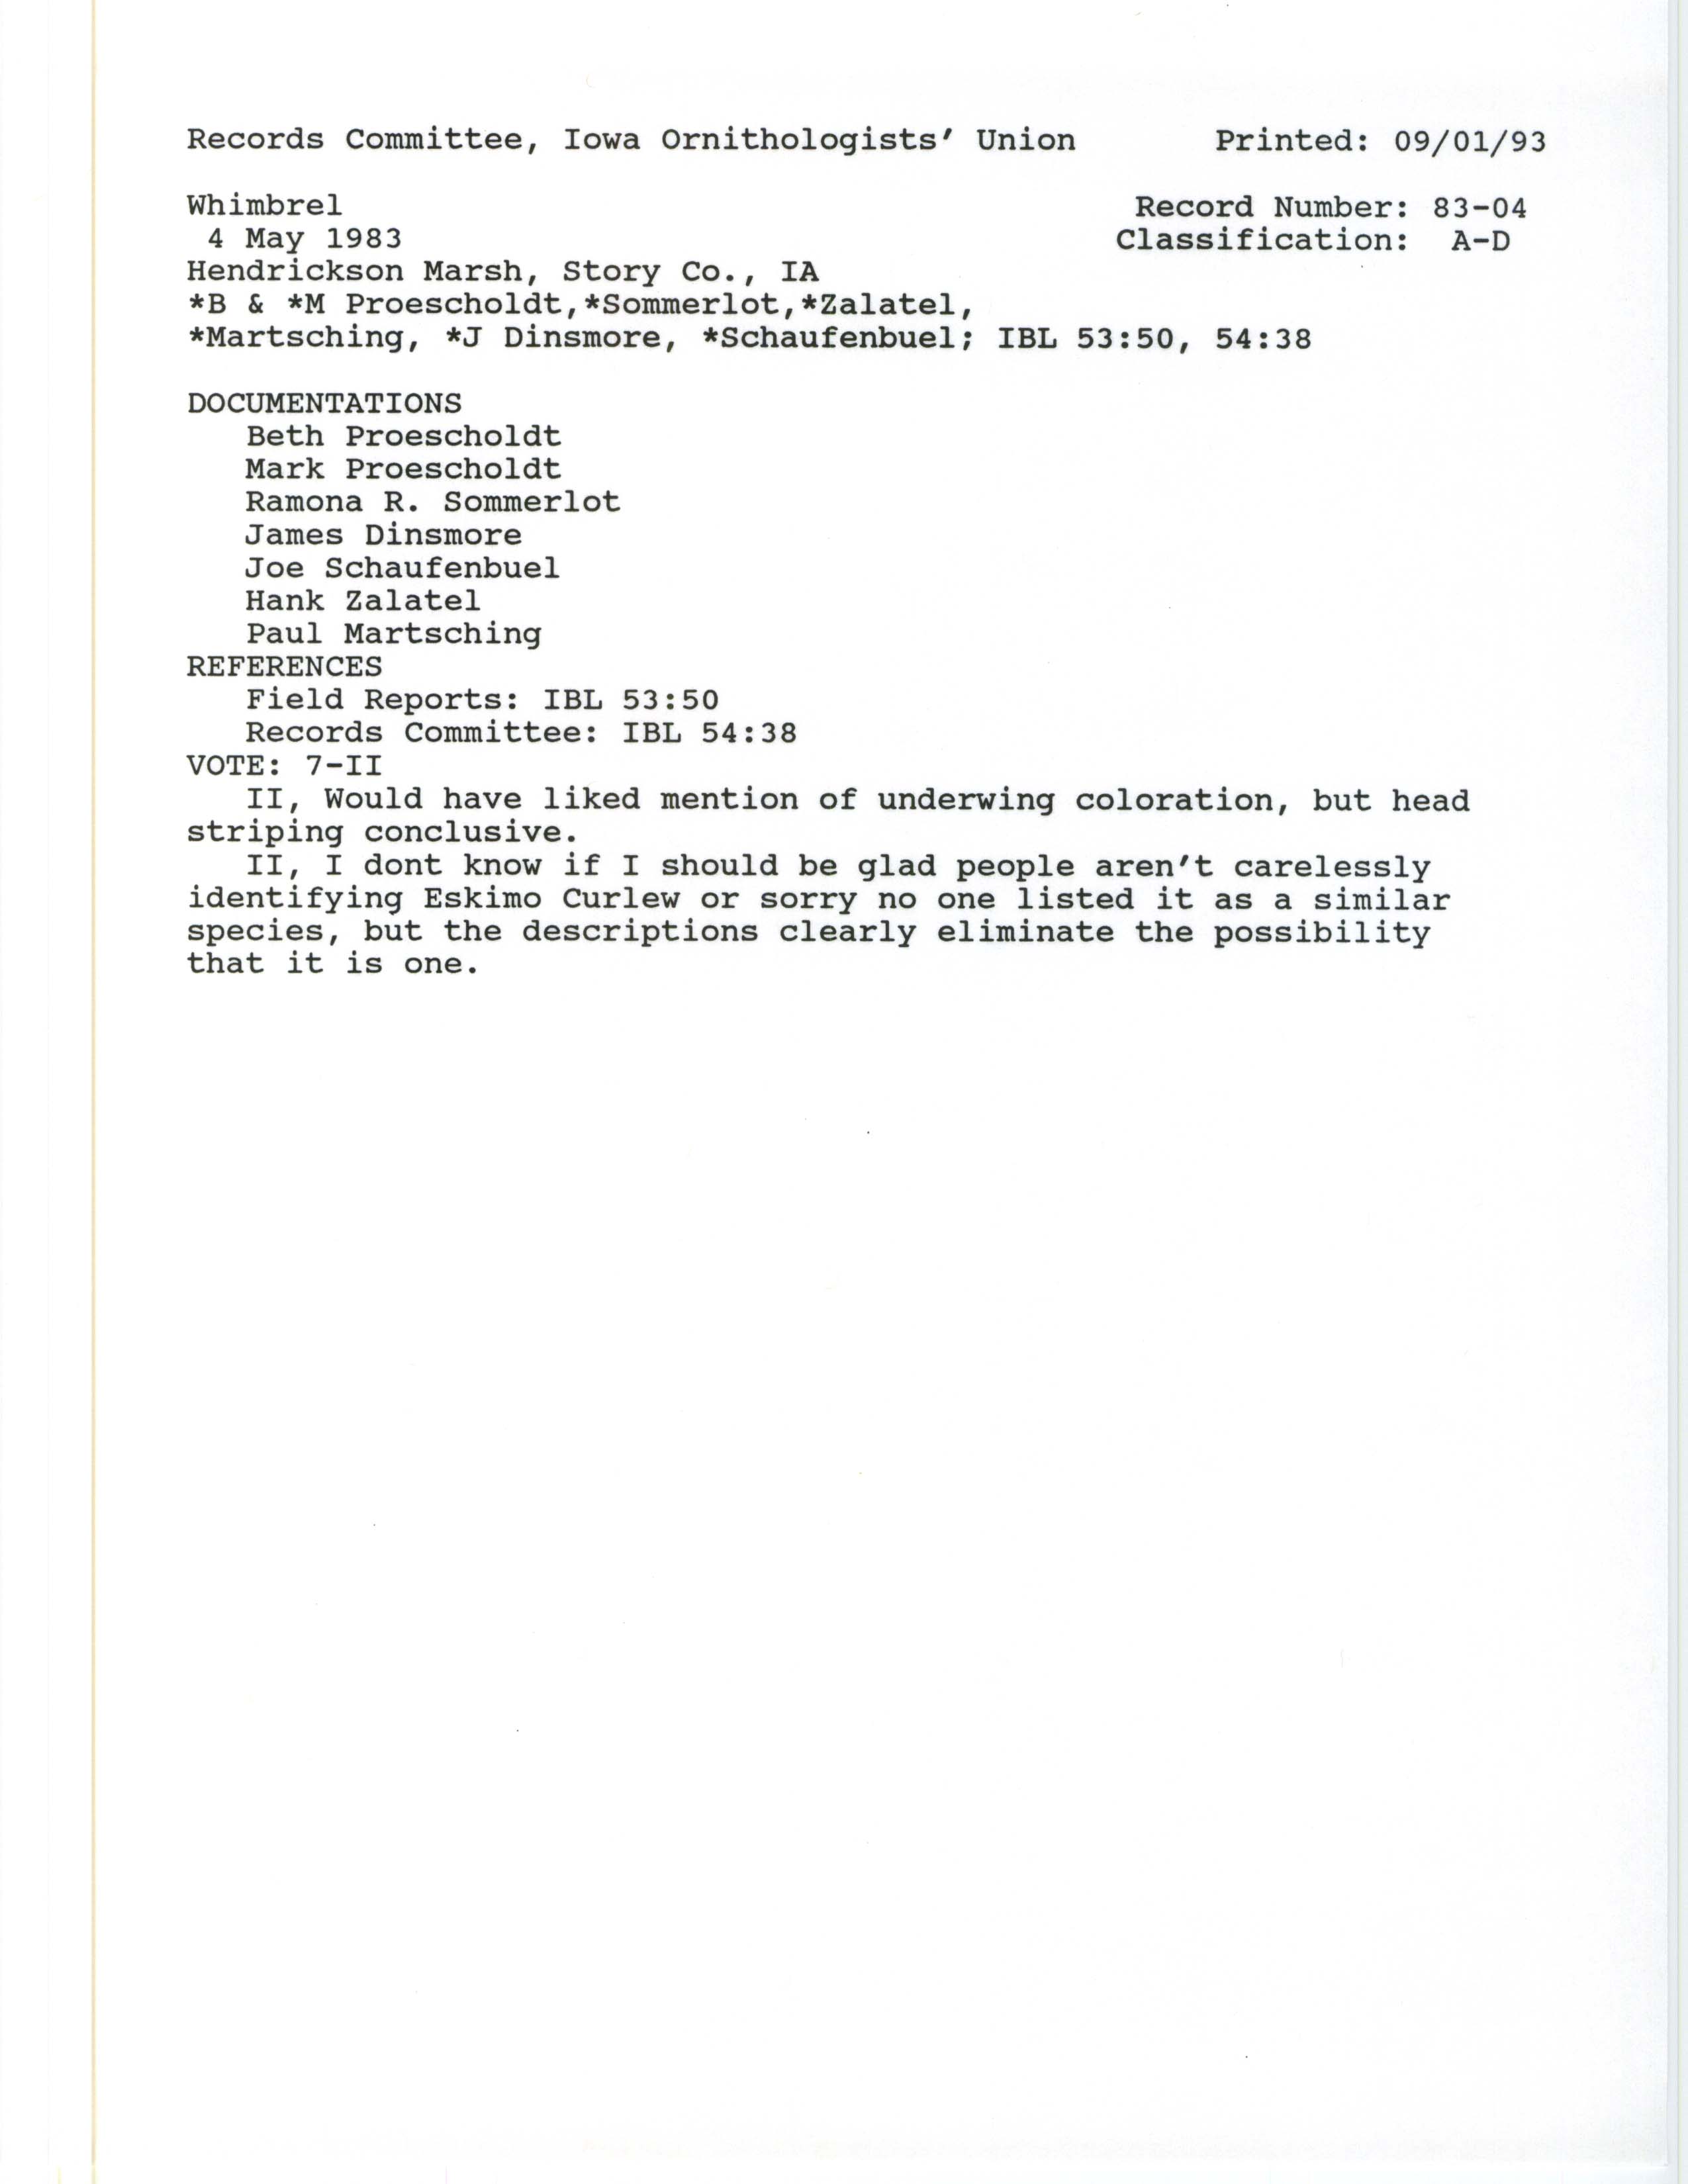 Records Committee review for rare bird sighting of Whimbrel at Hendrickson Marsh, 1983